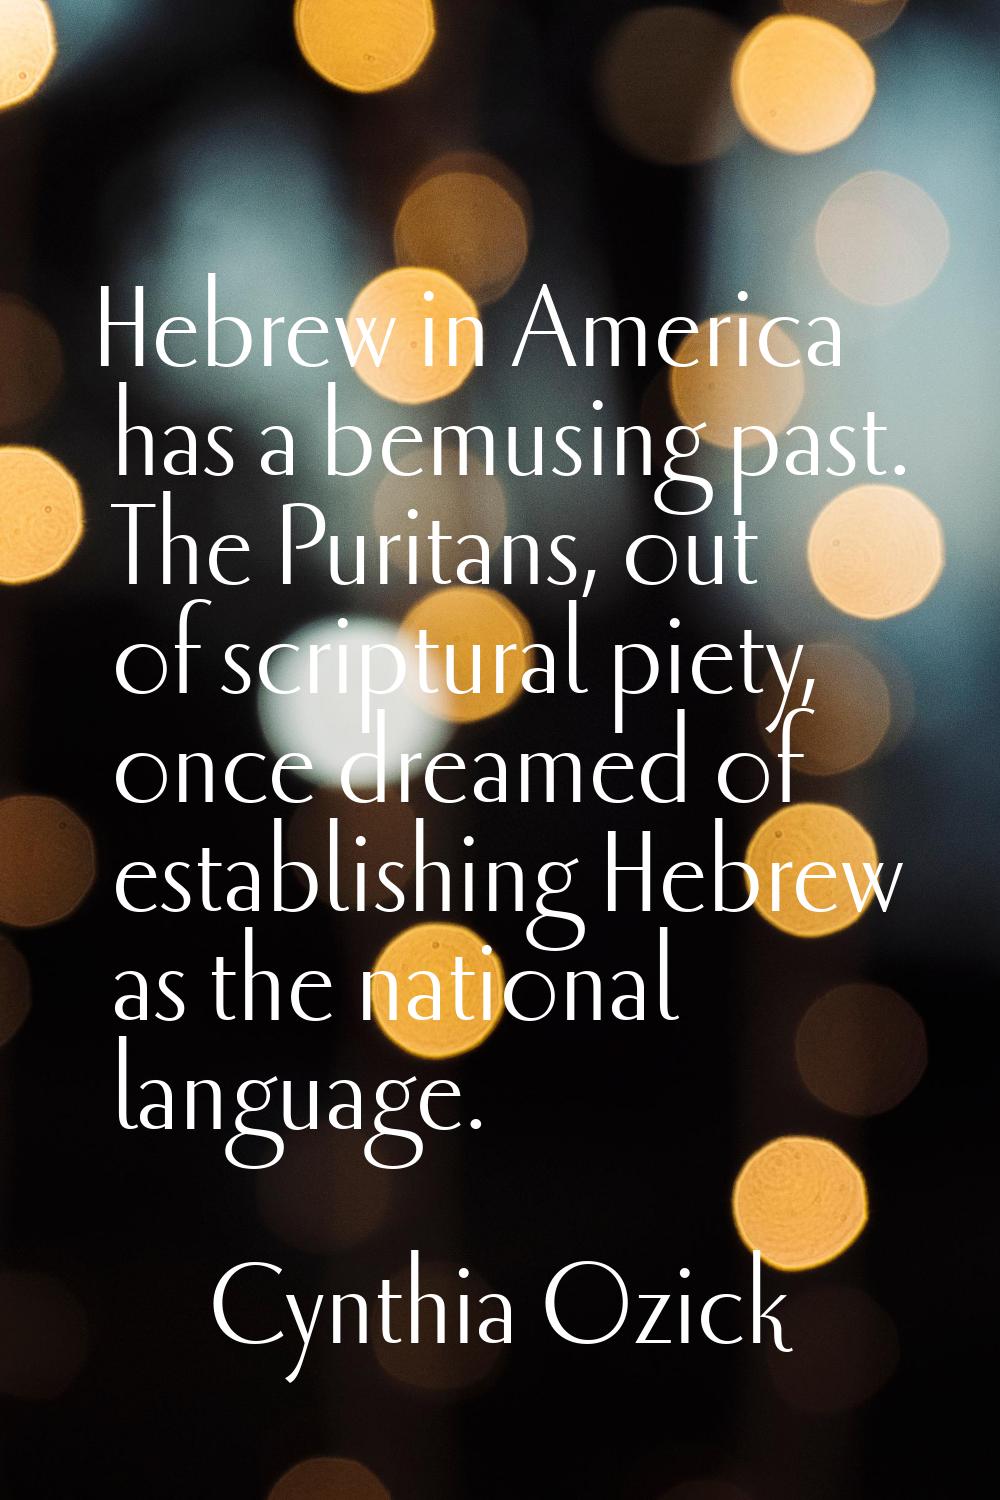 Hebrew in America has a bemusing past. The Puritans, out of scriptural piety, once dreamed of estab